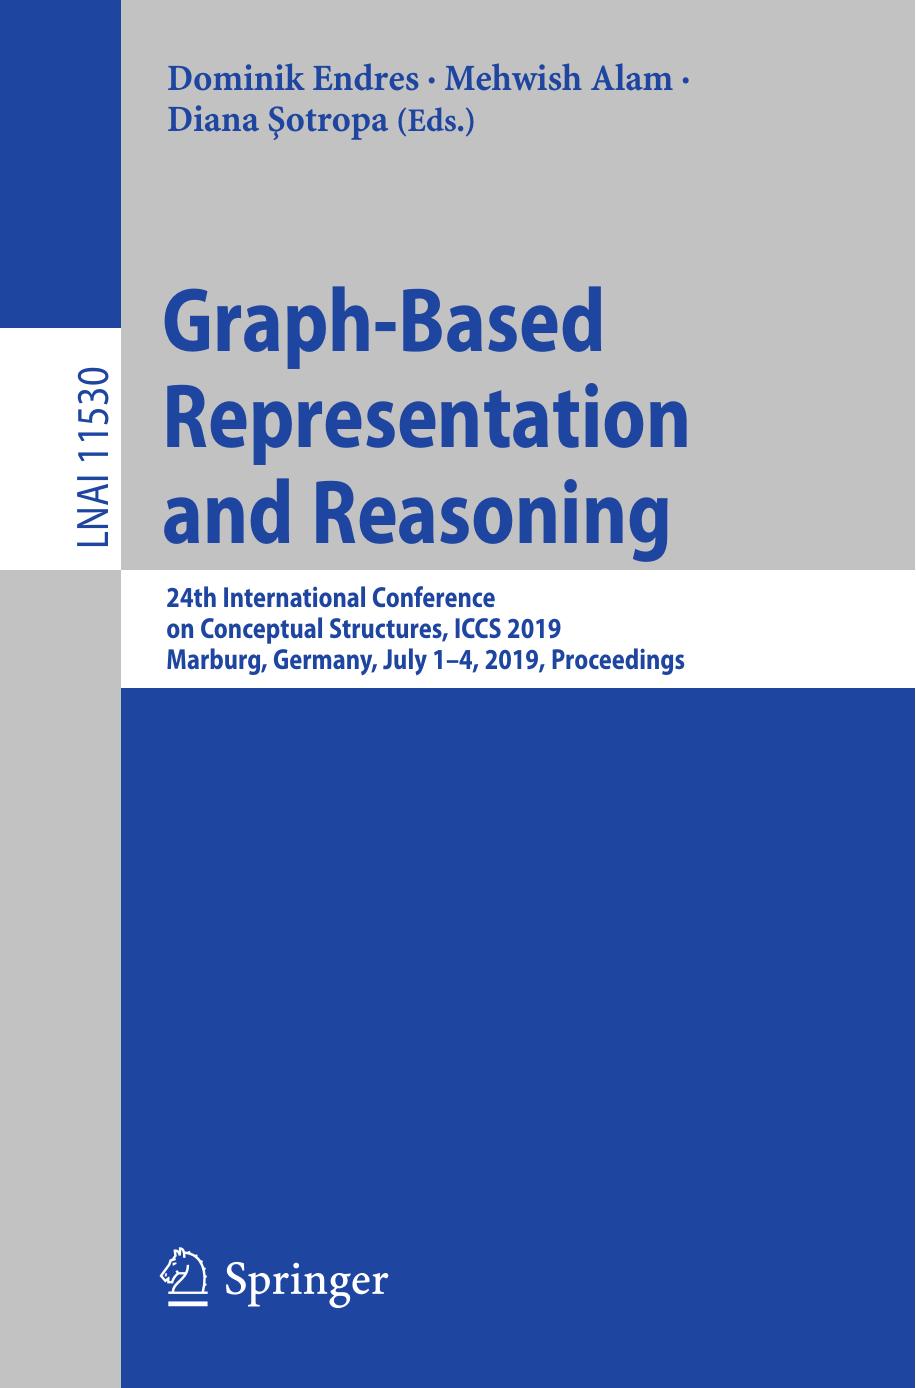 Graph-Based Representation and Reasoning: 24th International Conference on Conceptual Structures, ICCS 2019, Marburg, Germany, July 1–4, 2019, Proceedings